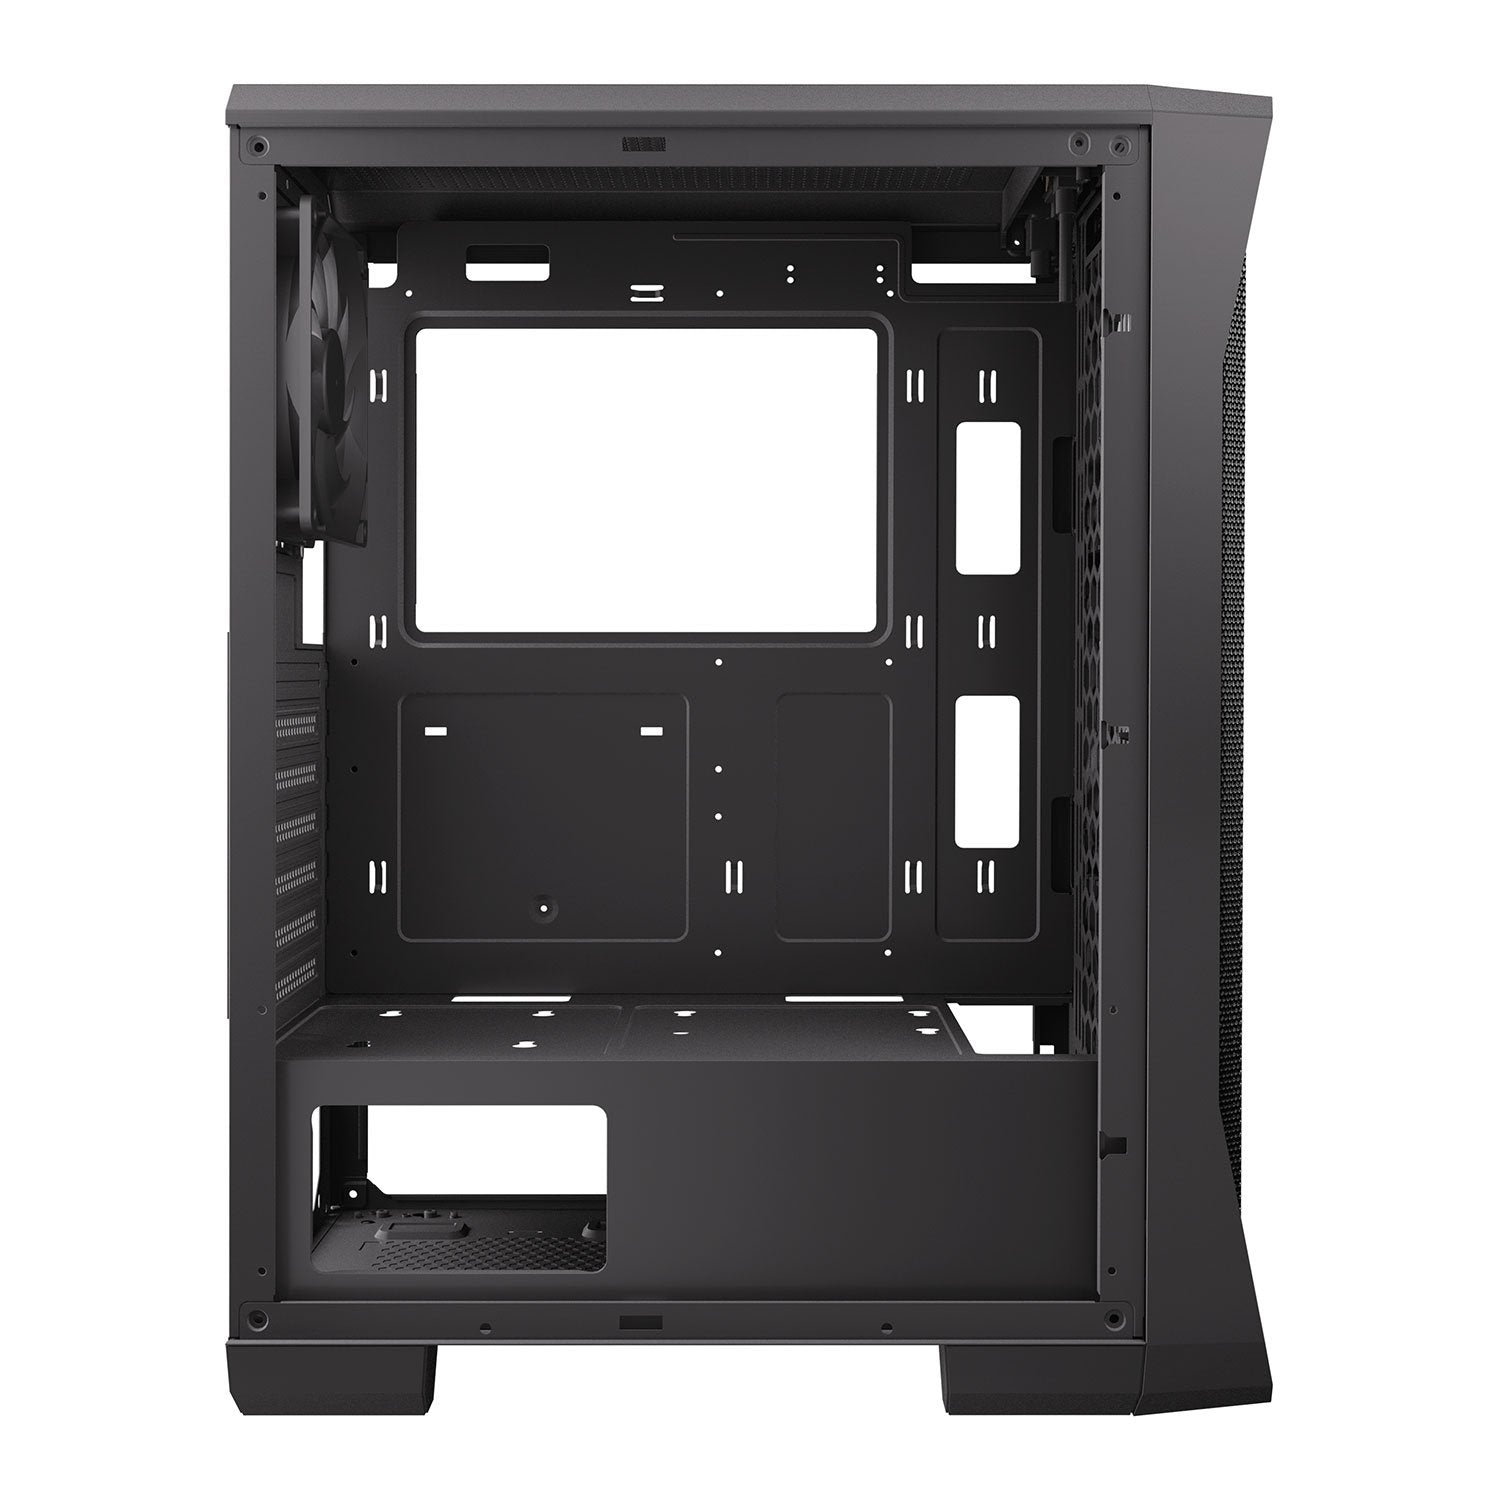 Antec NX360 Mid Tower Tempered Glass PC Gaming Case